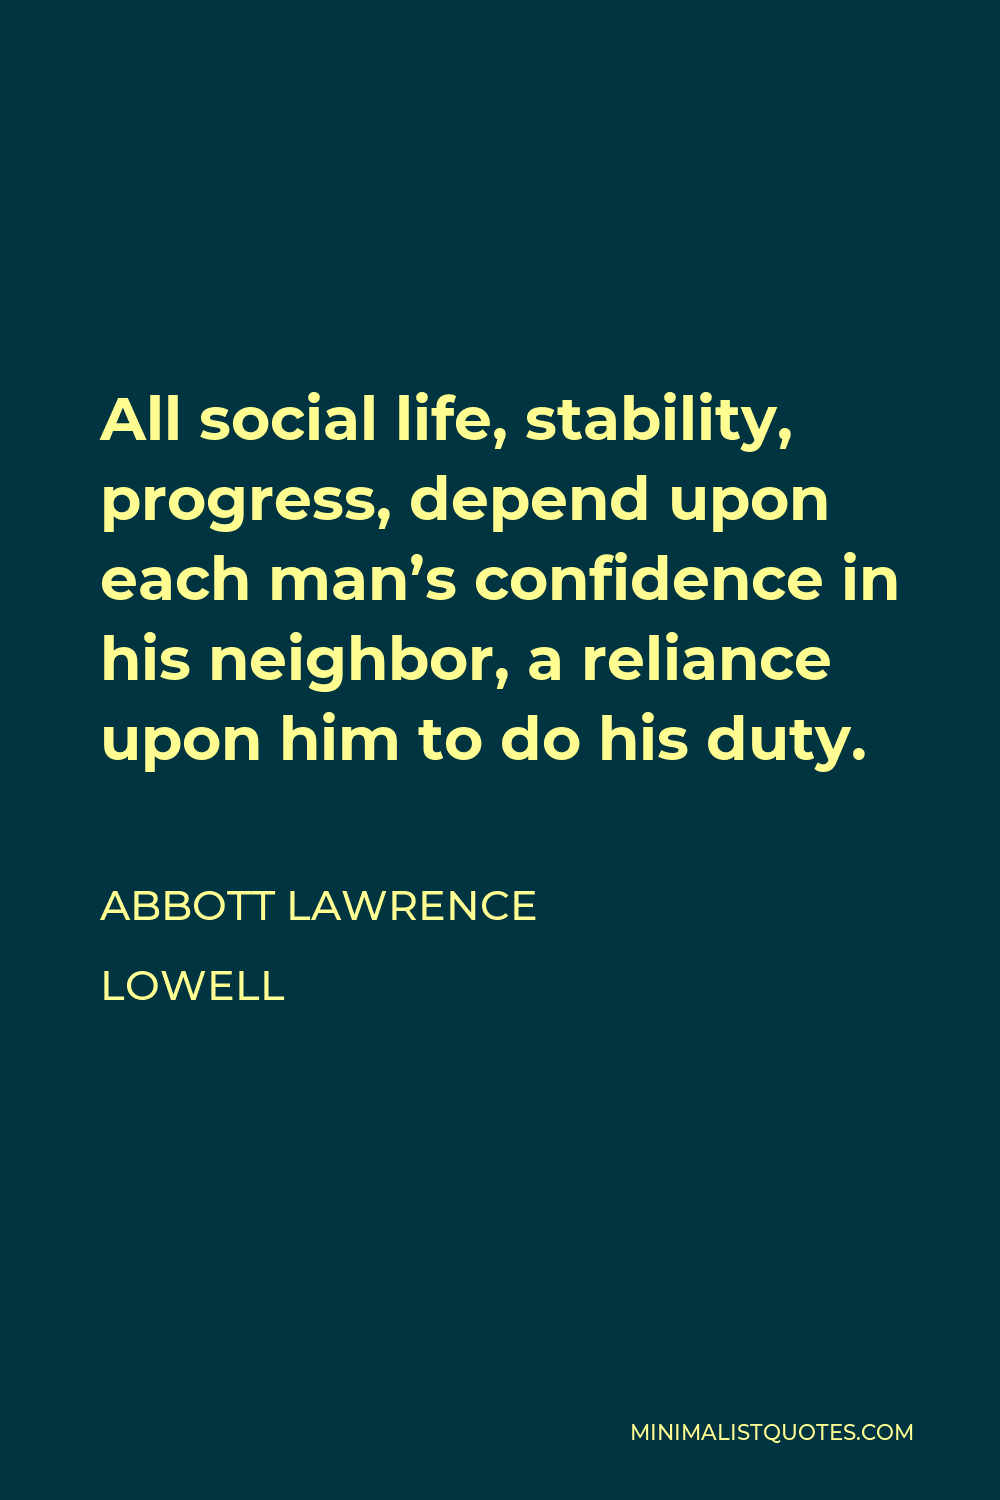 Abbott Lawrence Lowell Quote - All social life, stability, progress, depend upon each man’s confidence in his neighbor, a reliance upon him to do his duty.